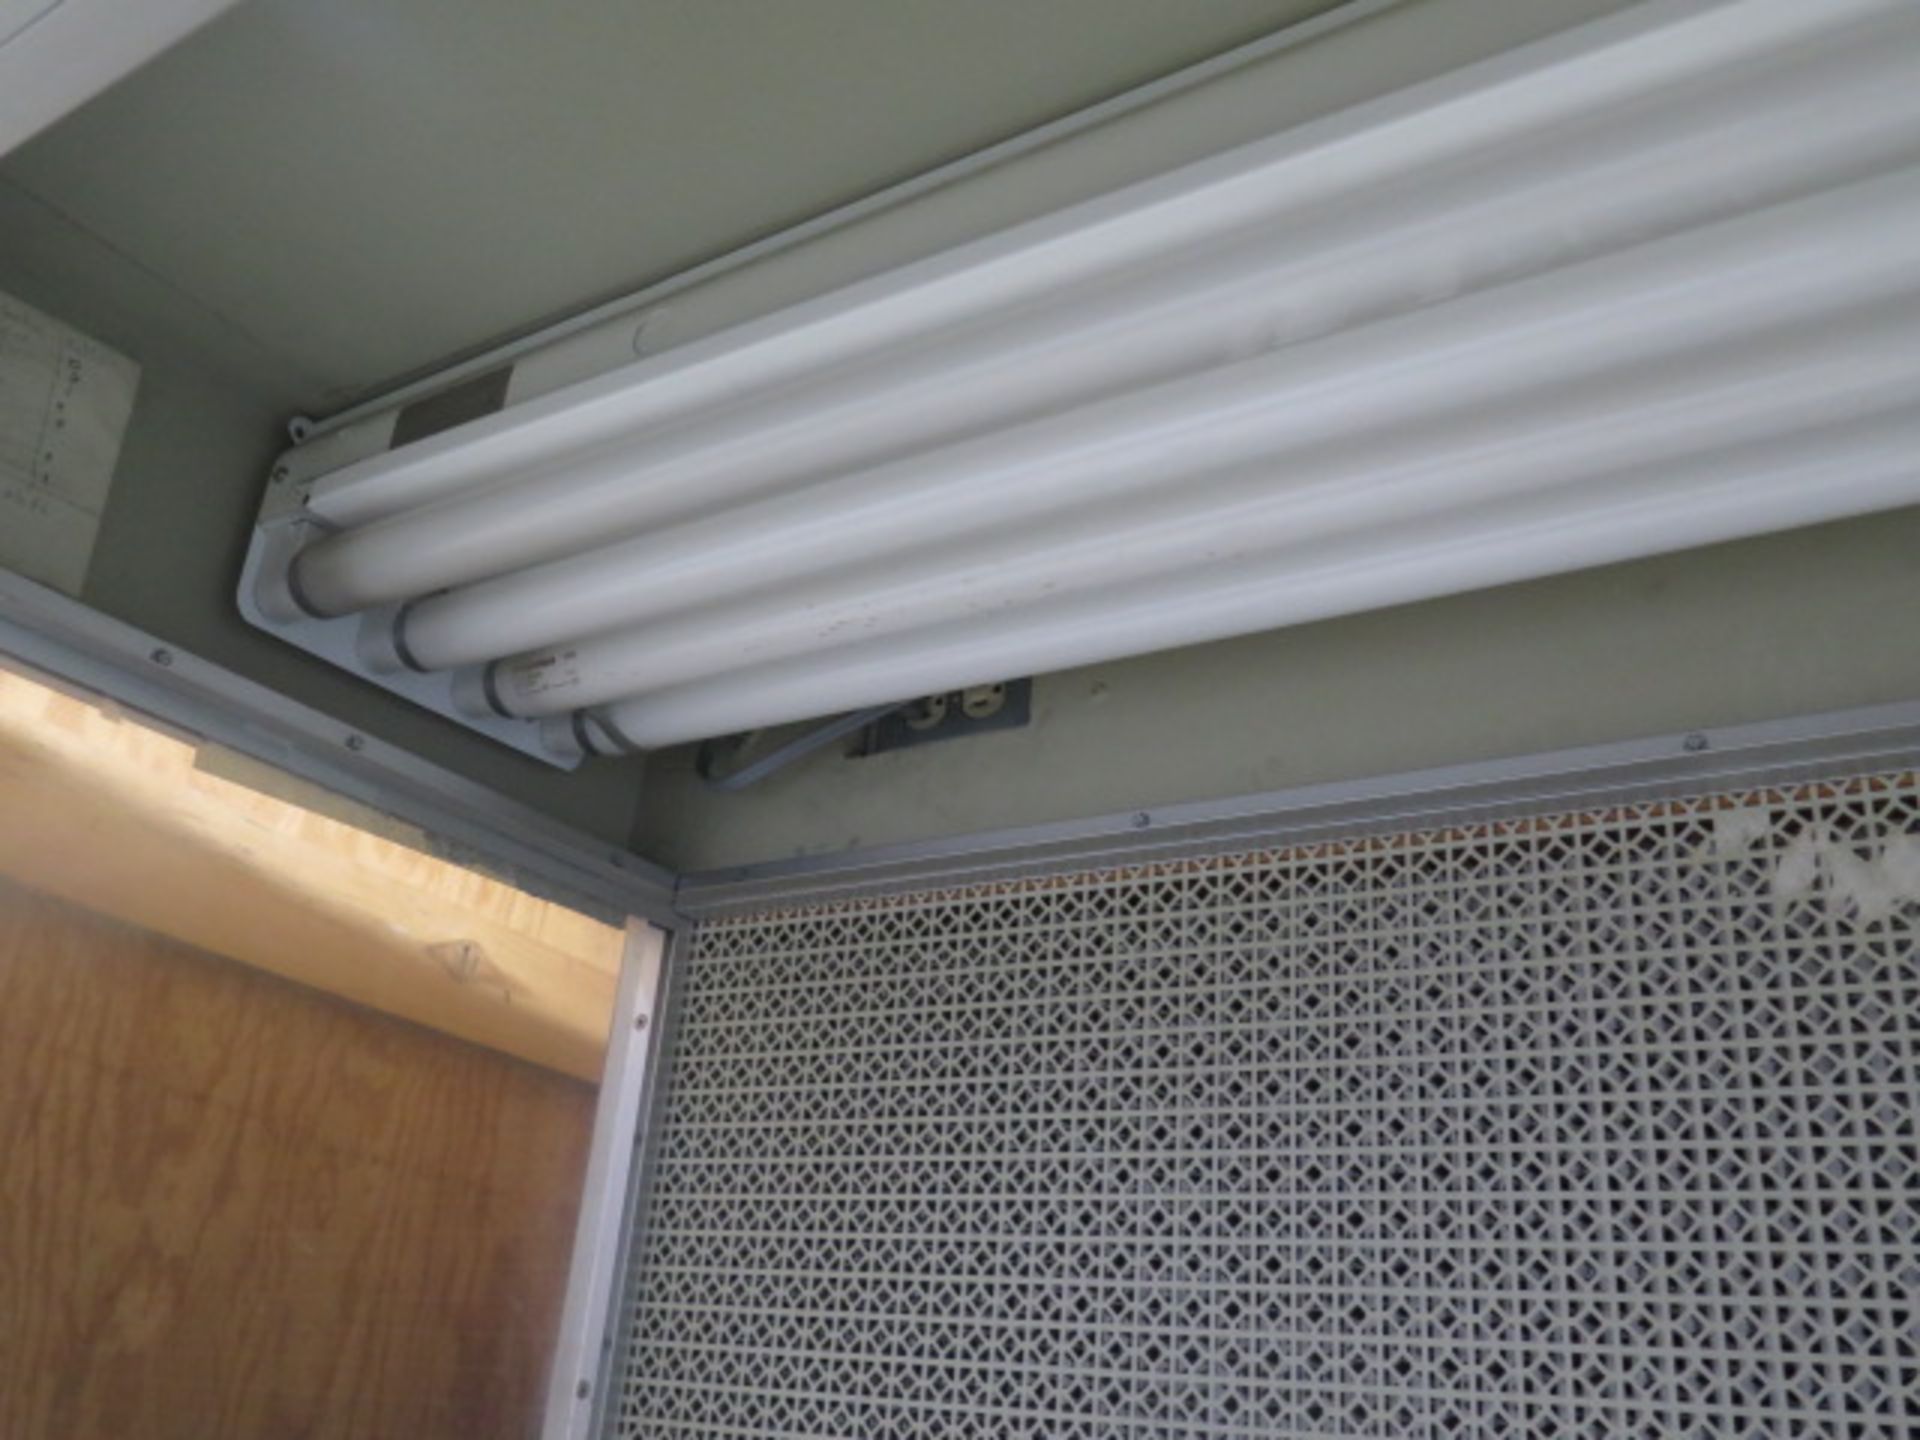 Airtech Fume Ventilation Hood (SOLD AS-IS - NO WARRANTY) (Located @ 2229 Ringwood Ave. San Jose) - Image 4 of 6